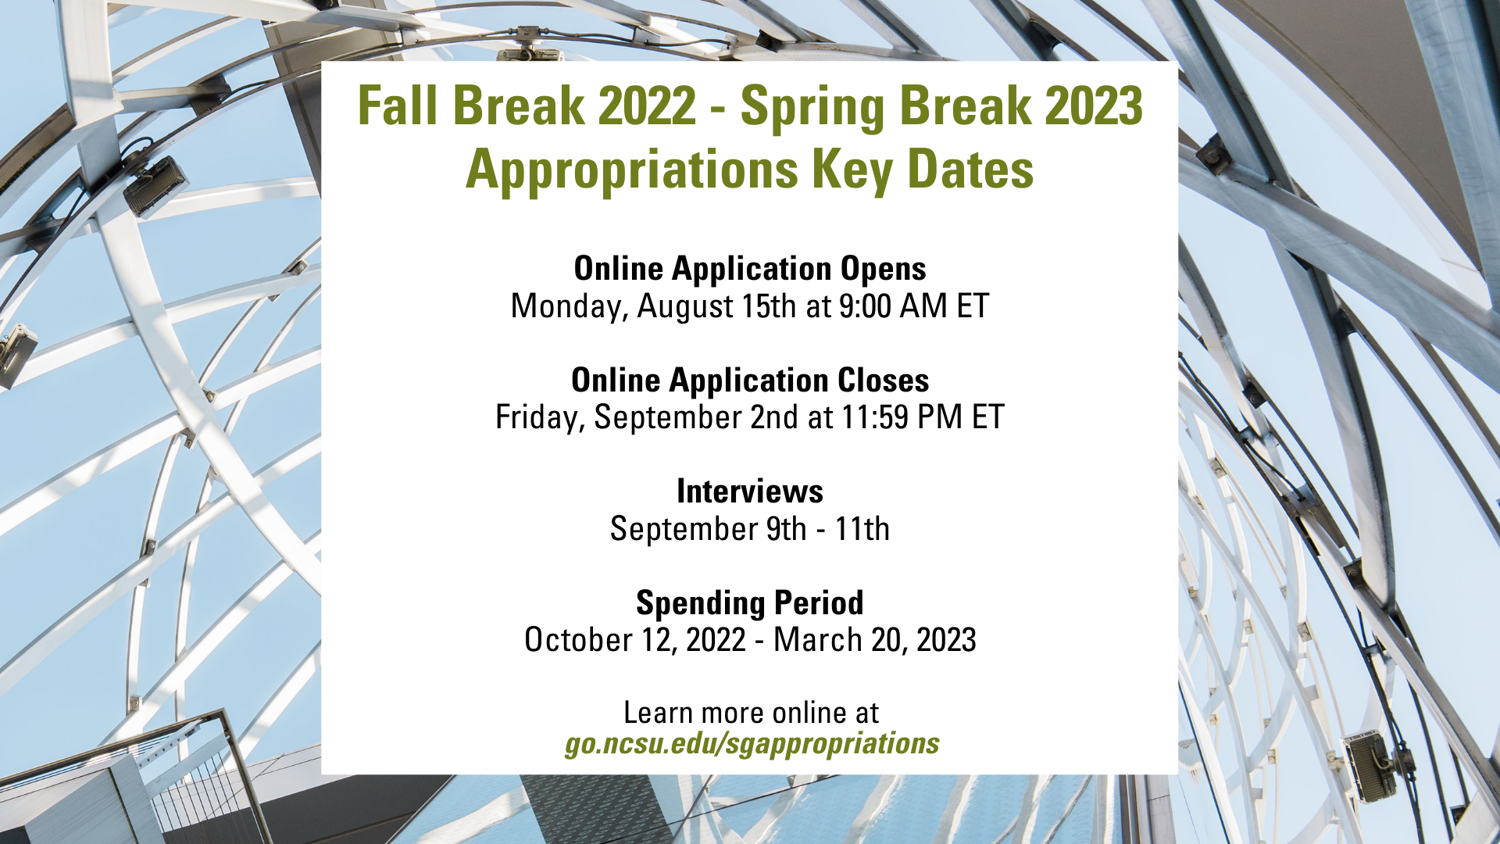 The Online Application opens on Monday, August 15, 2022 at 9:00 AM ET and will close on Friday, September 2, 2022 at 11:59 PM ET. Student Organization Interviews will be September 9th - 11th.